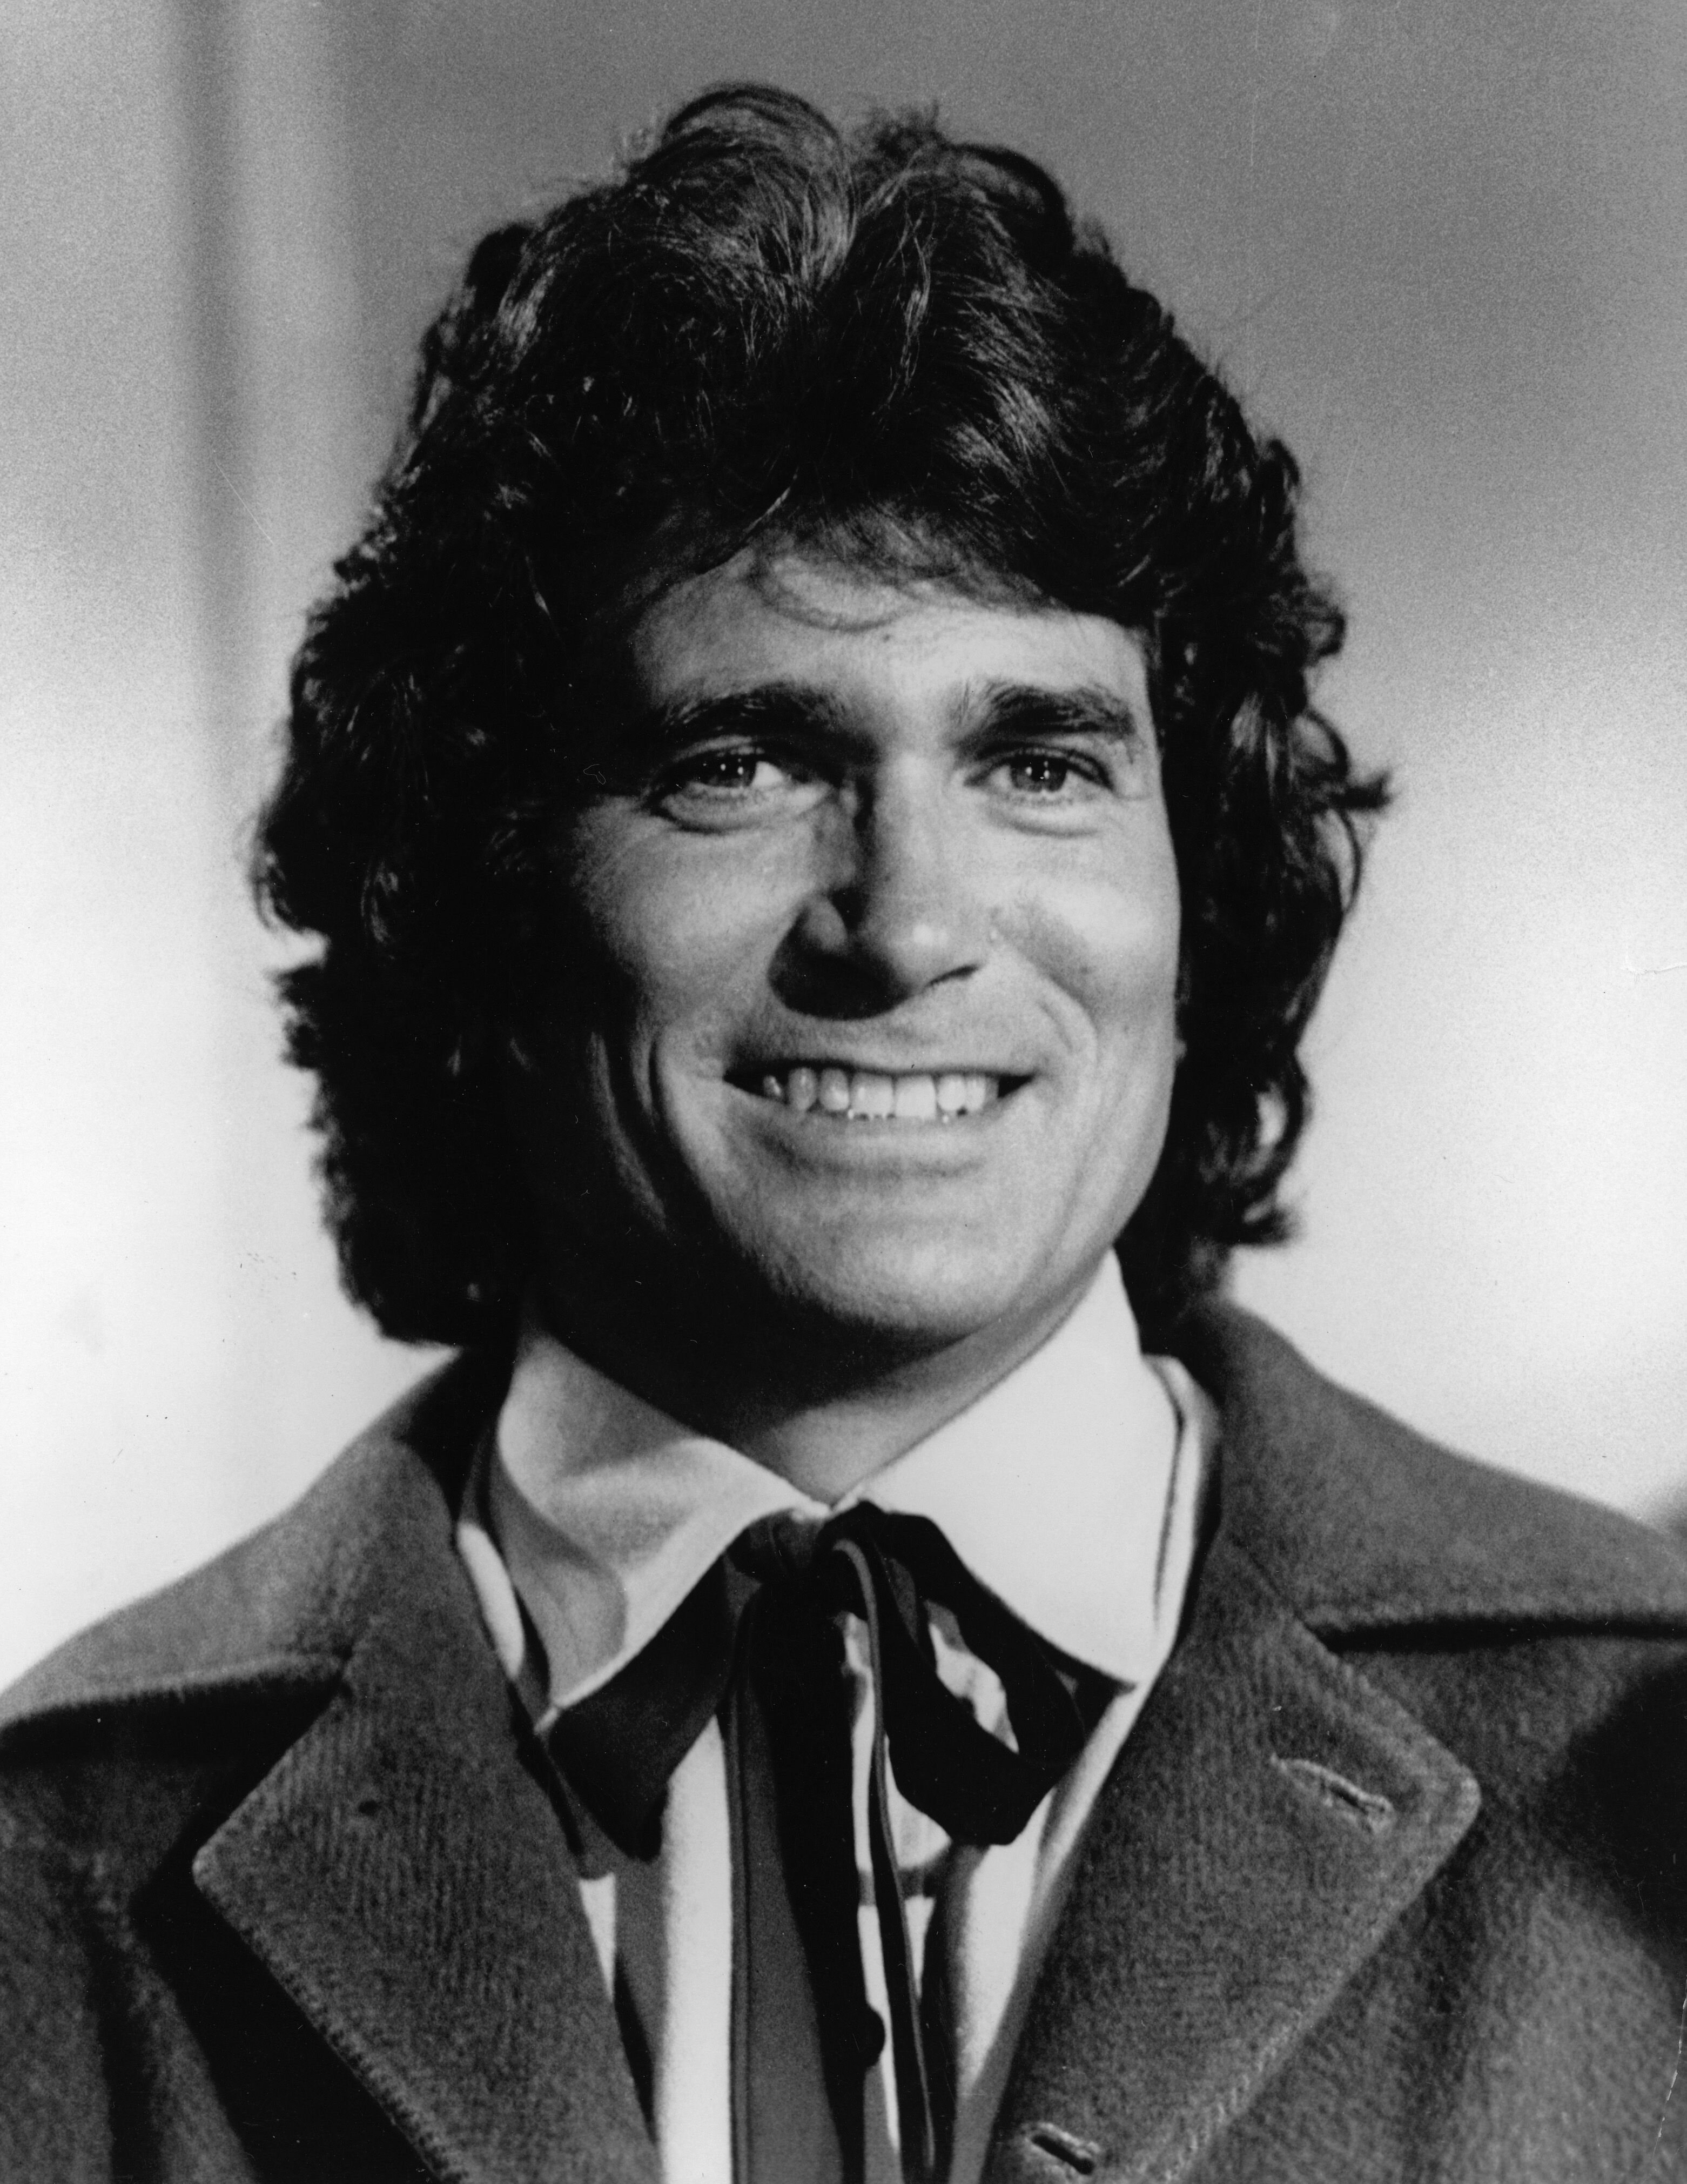 Michael Landon was the loving and understanding father on 'Little House on the Prairie'. Photo: Getty Images/GlobalImagesUkraine